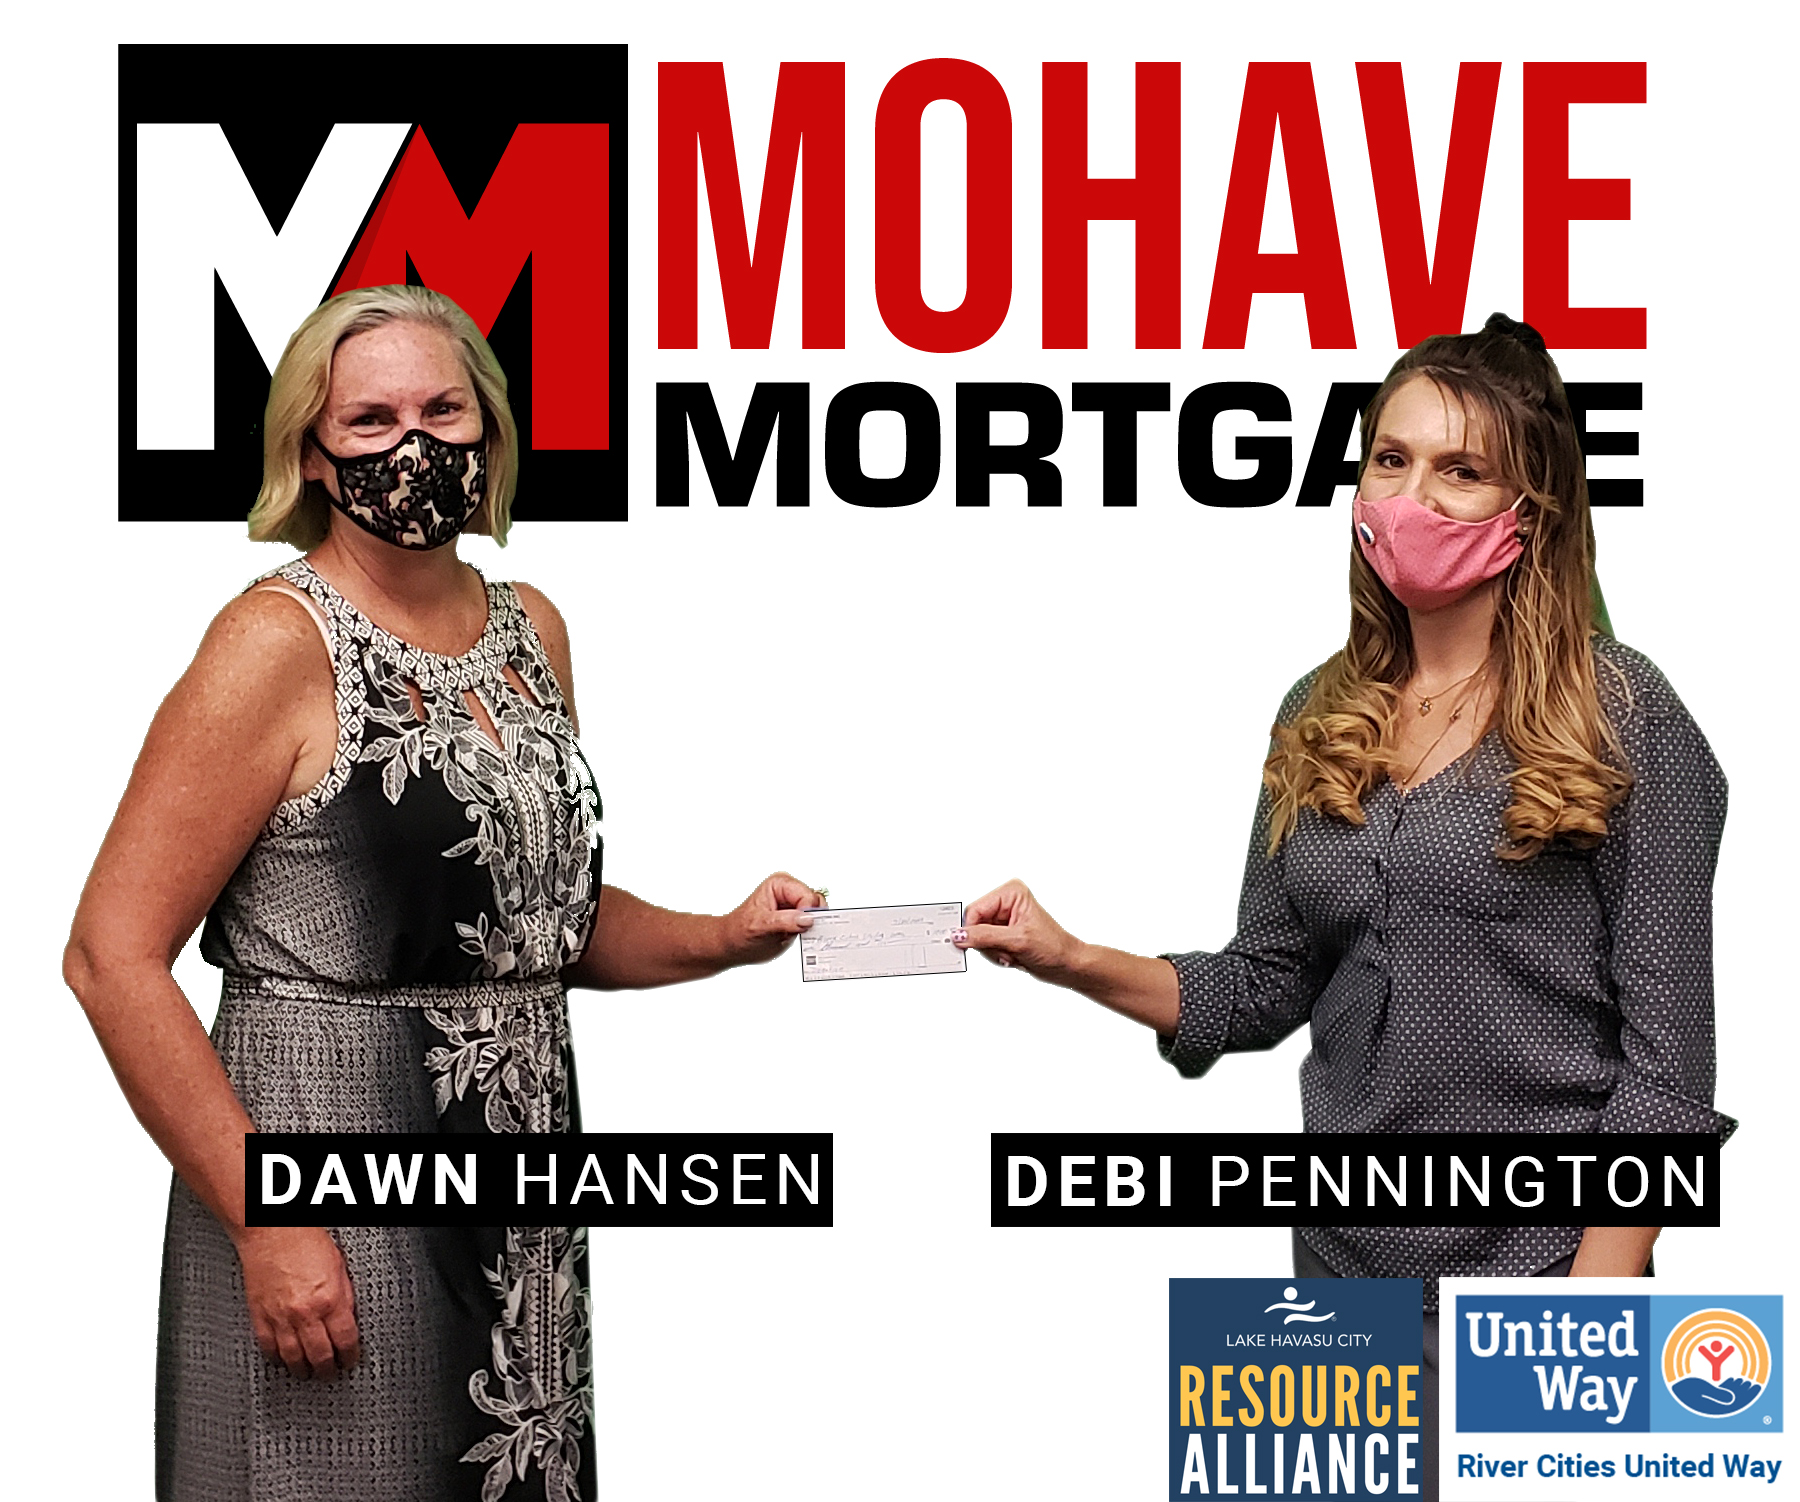 Mohave Mortgage Donates $1,000 On-Air to the LHC Resource Alliance COVID-19 Relief Fund